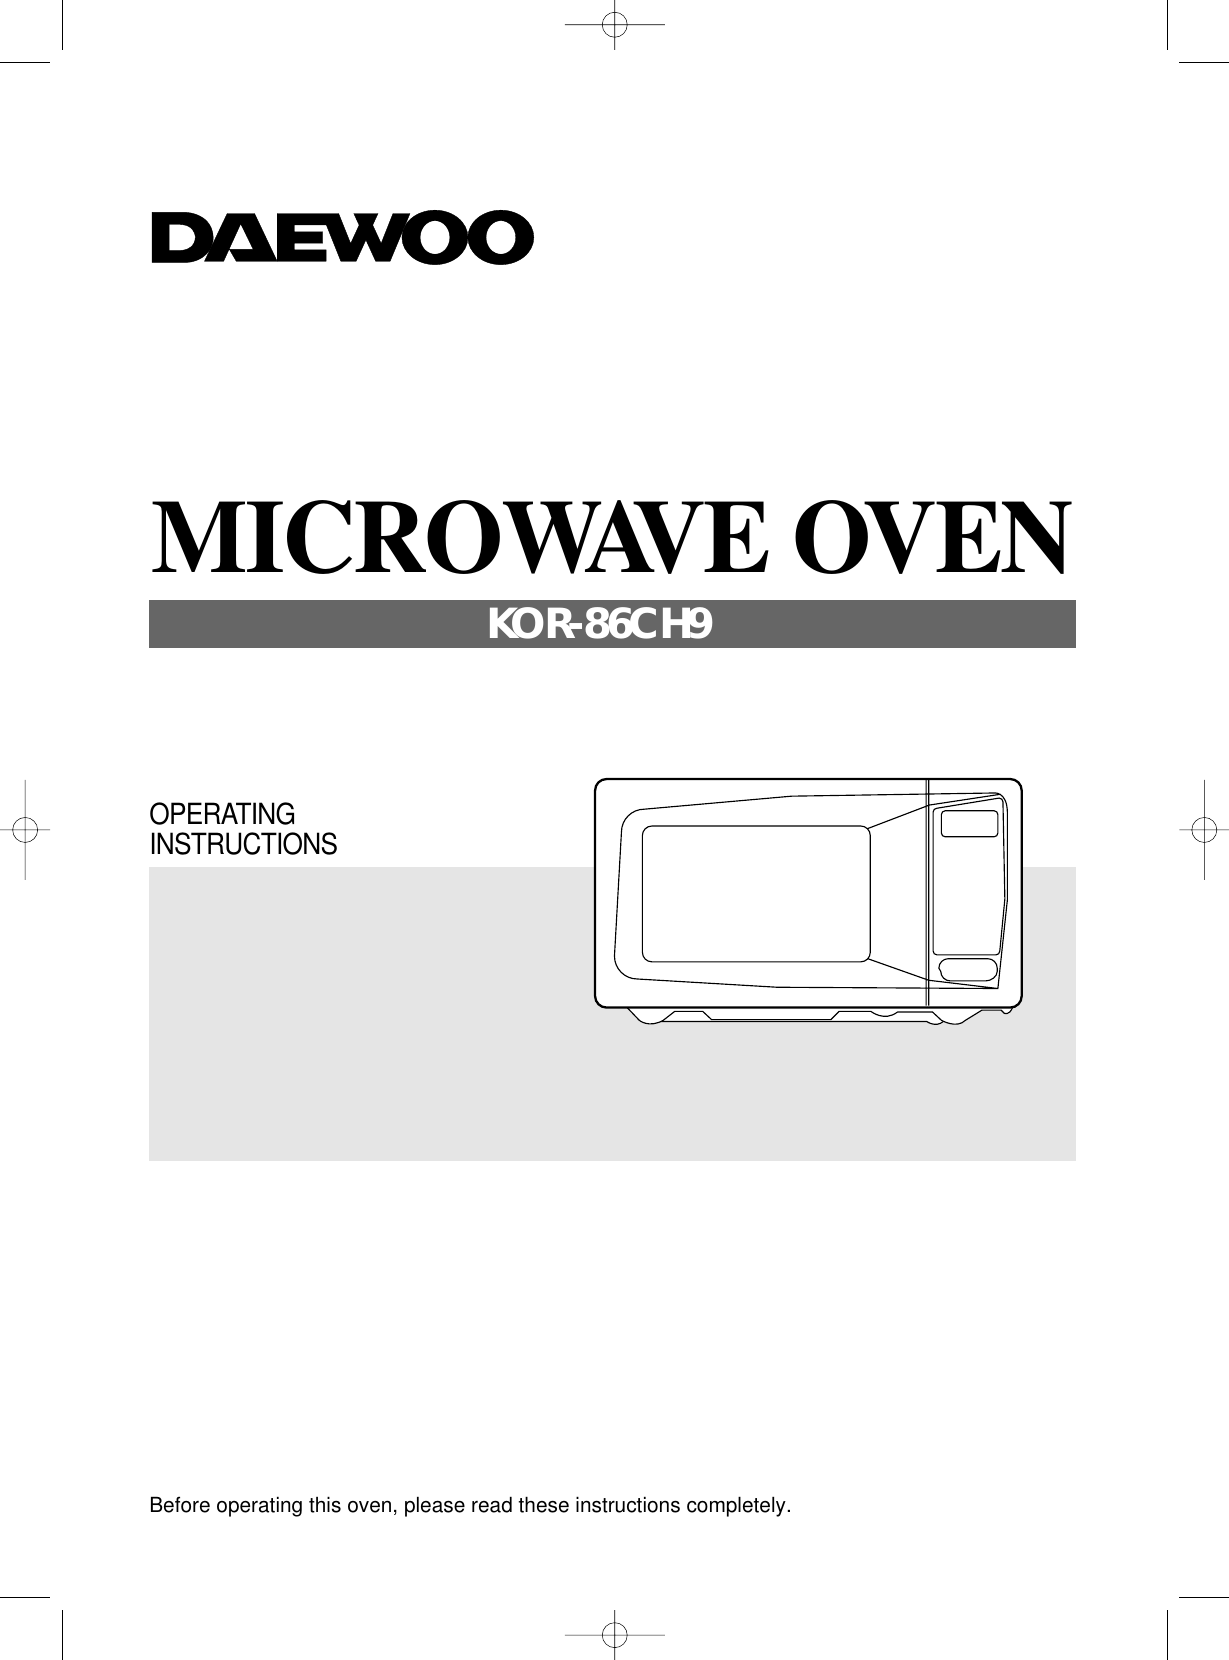 Before operating this oven, please read these instructions completely.OPERATINGINSTRUCTIONSMICROWAVE OVENKOR-86CH9